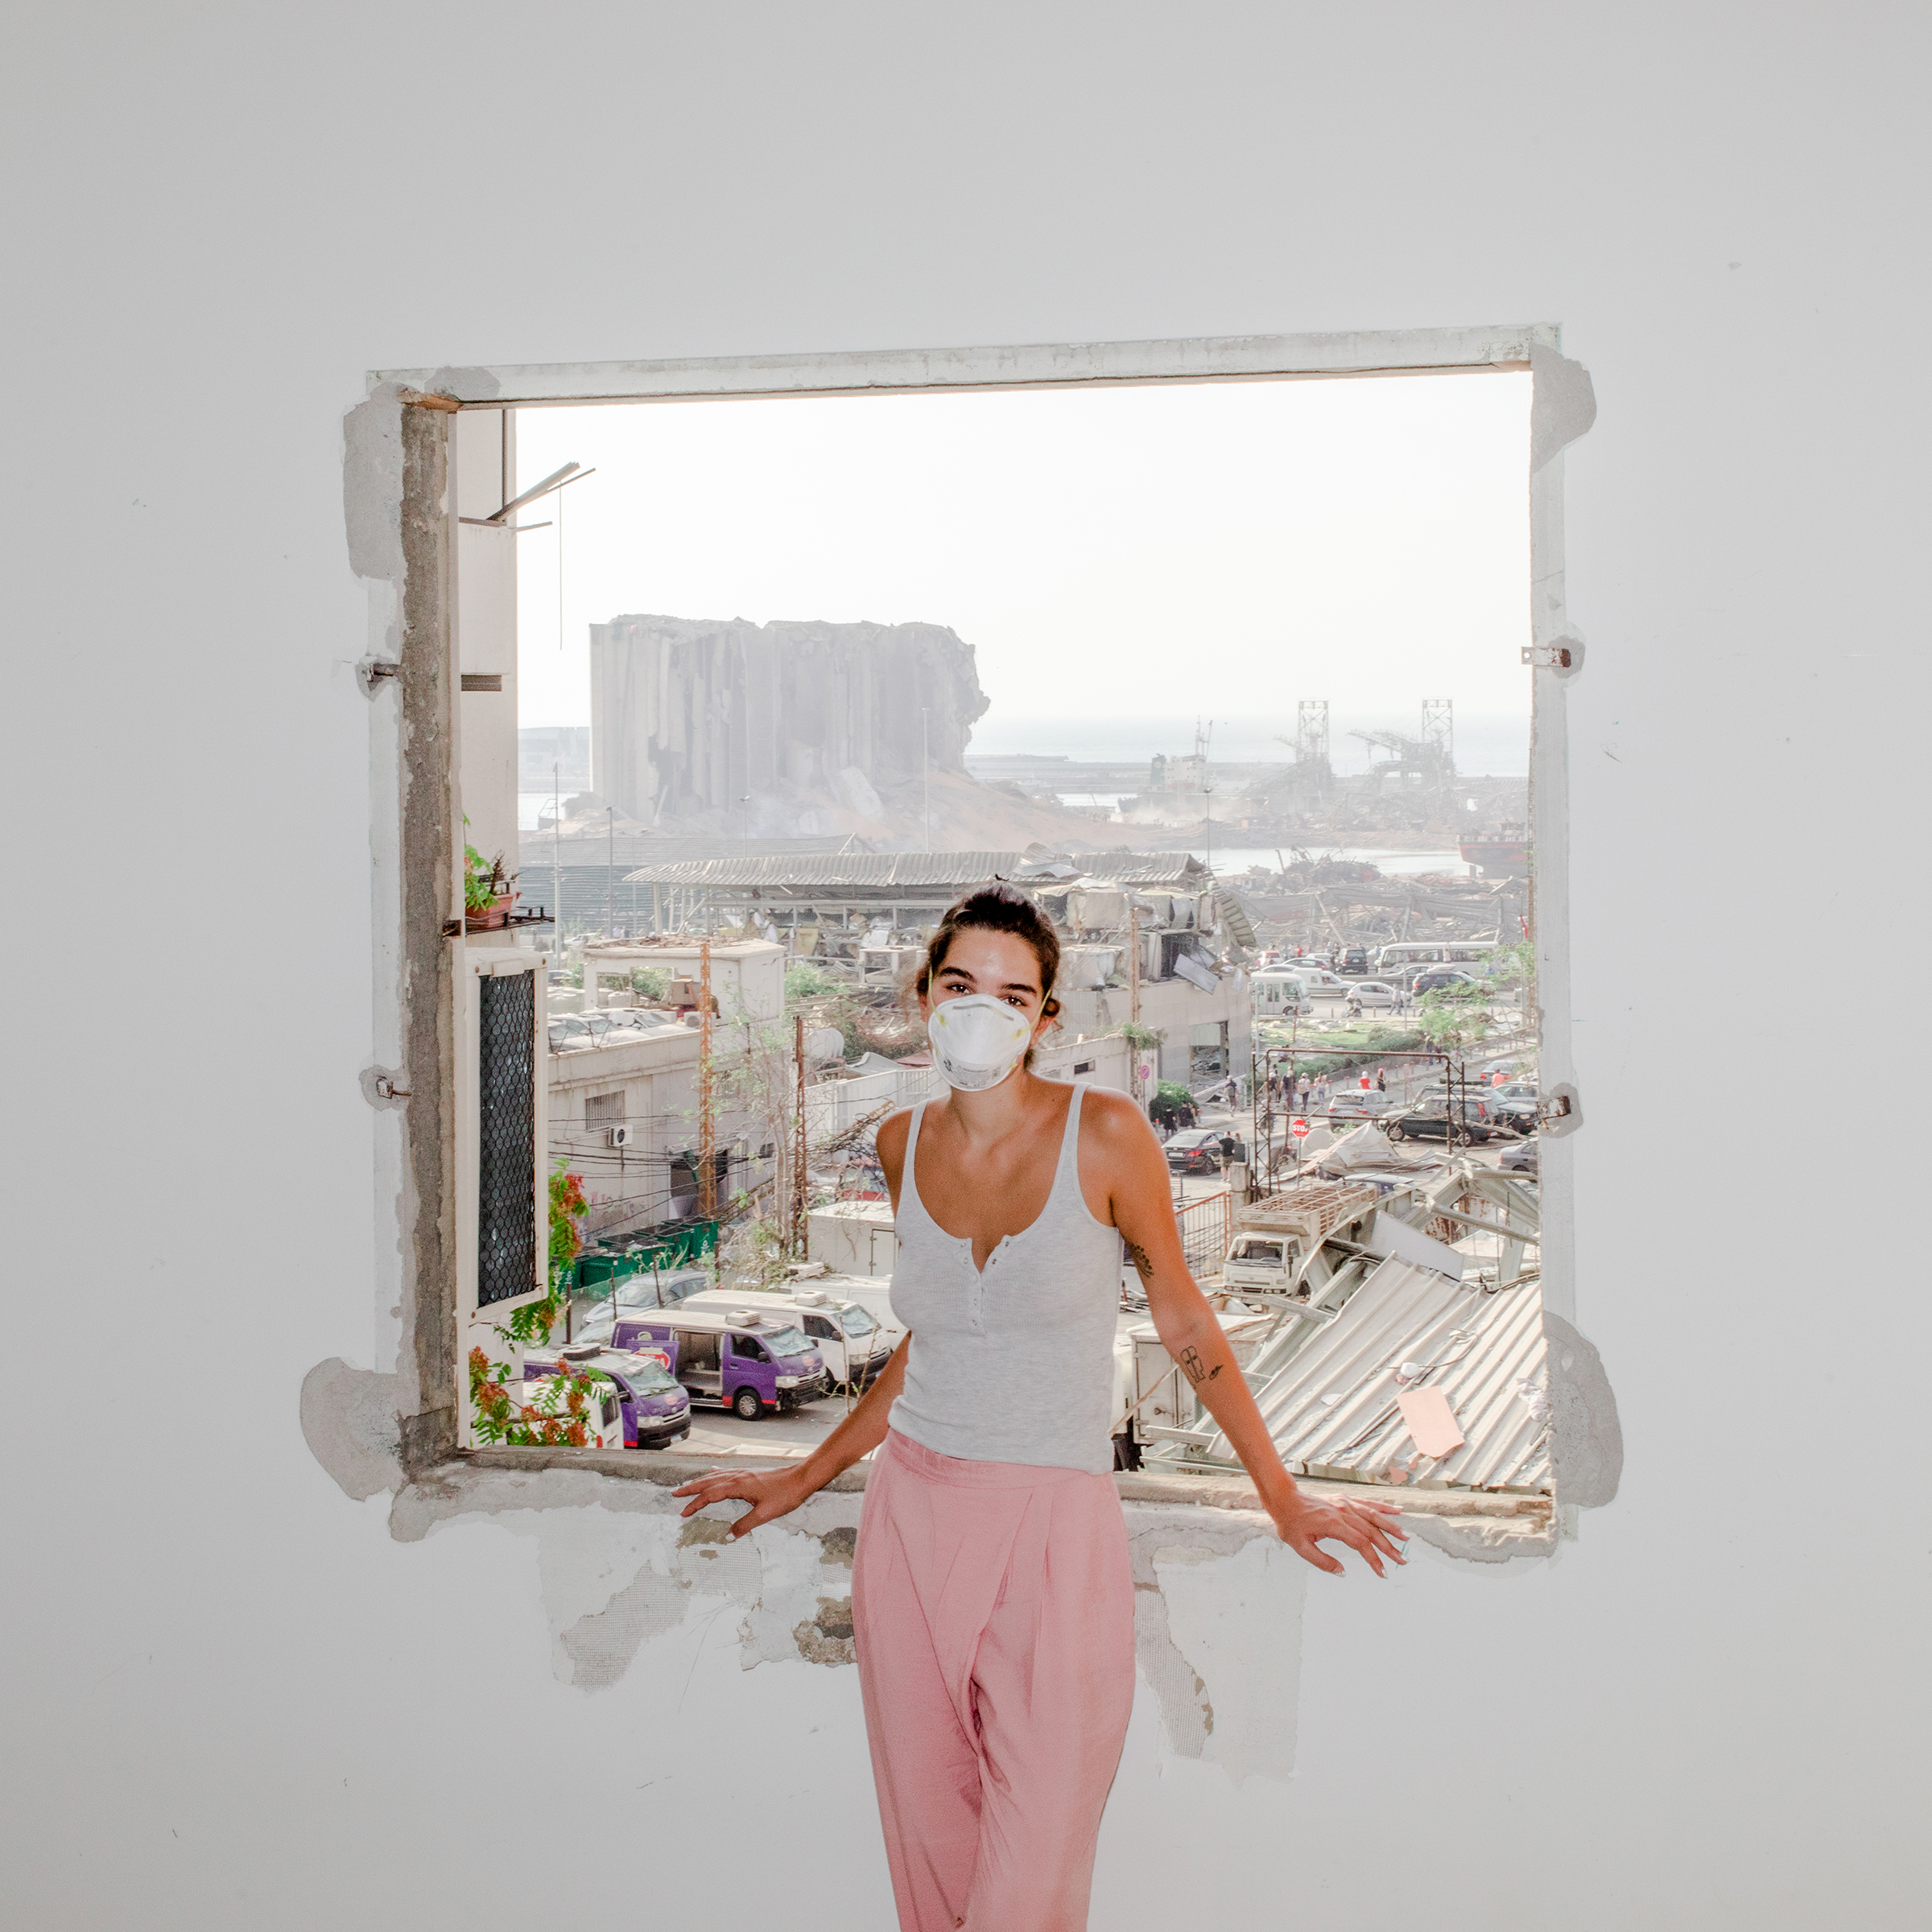 Nour Saliba stands in her apartment in the Mar Mikhael area of Beirut on Aug. 6, two days after the deadly explosion at the city’s port, seen through her blown-out window. “Honestly, I had it easy. I only lost my home. I am one of the lucky ones who still have their family and friends by their side,” says the 27-year-old community manager and model. “Trauma is written all over the fumes of this explosion. Yes, we are all traumatized, but we are also burnt out.